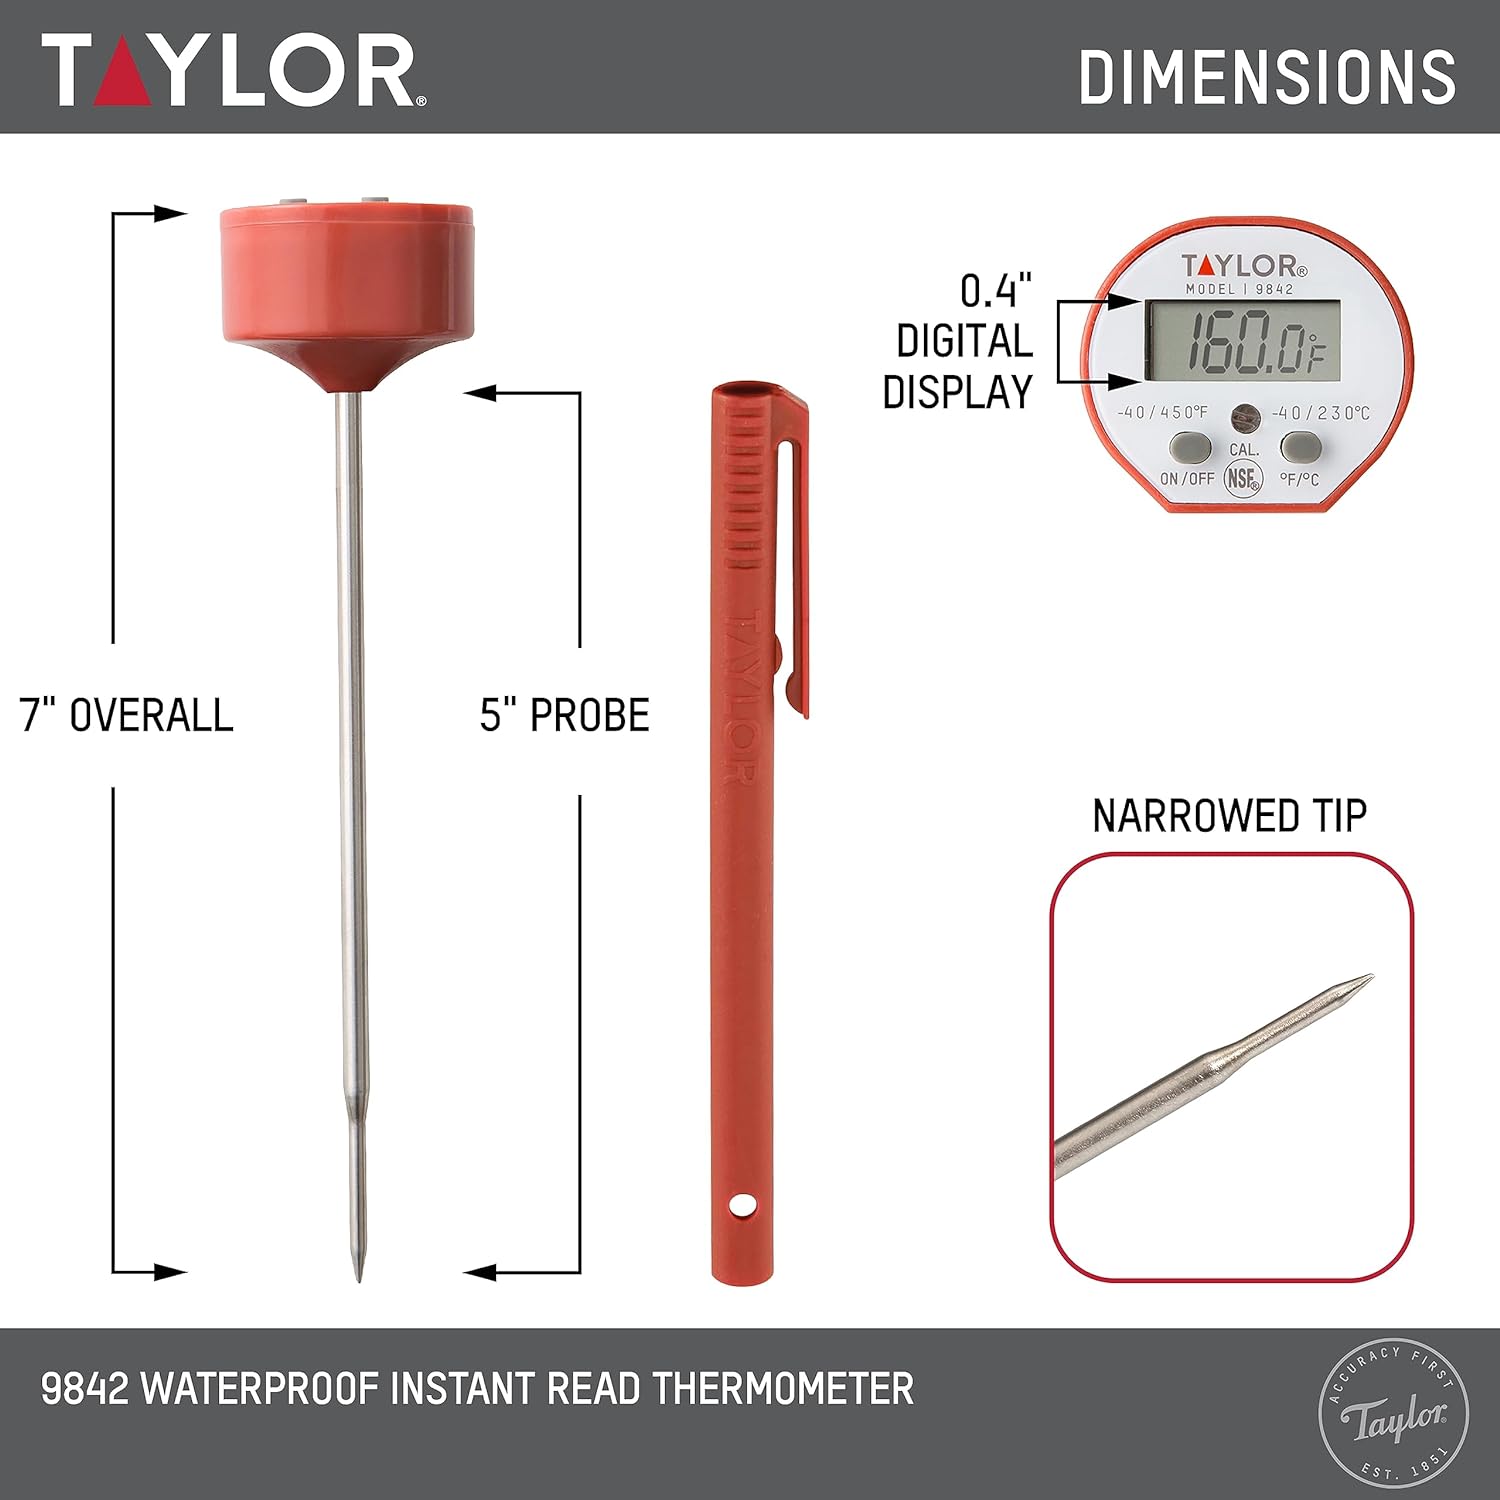 Taylor Waterproof Digital Instant Read Thermometer For Cooking, BBQ, Grilling, Baking, And Meat, Comes With Pocket Sleeve Clip, Red